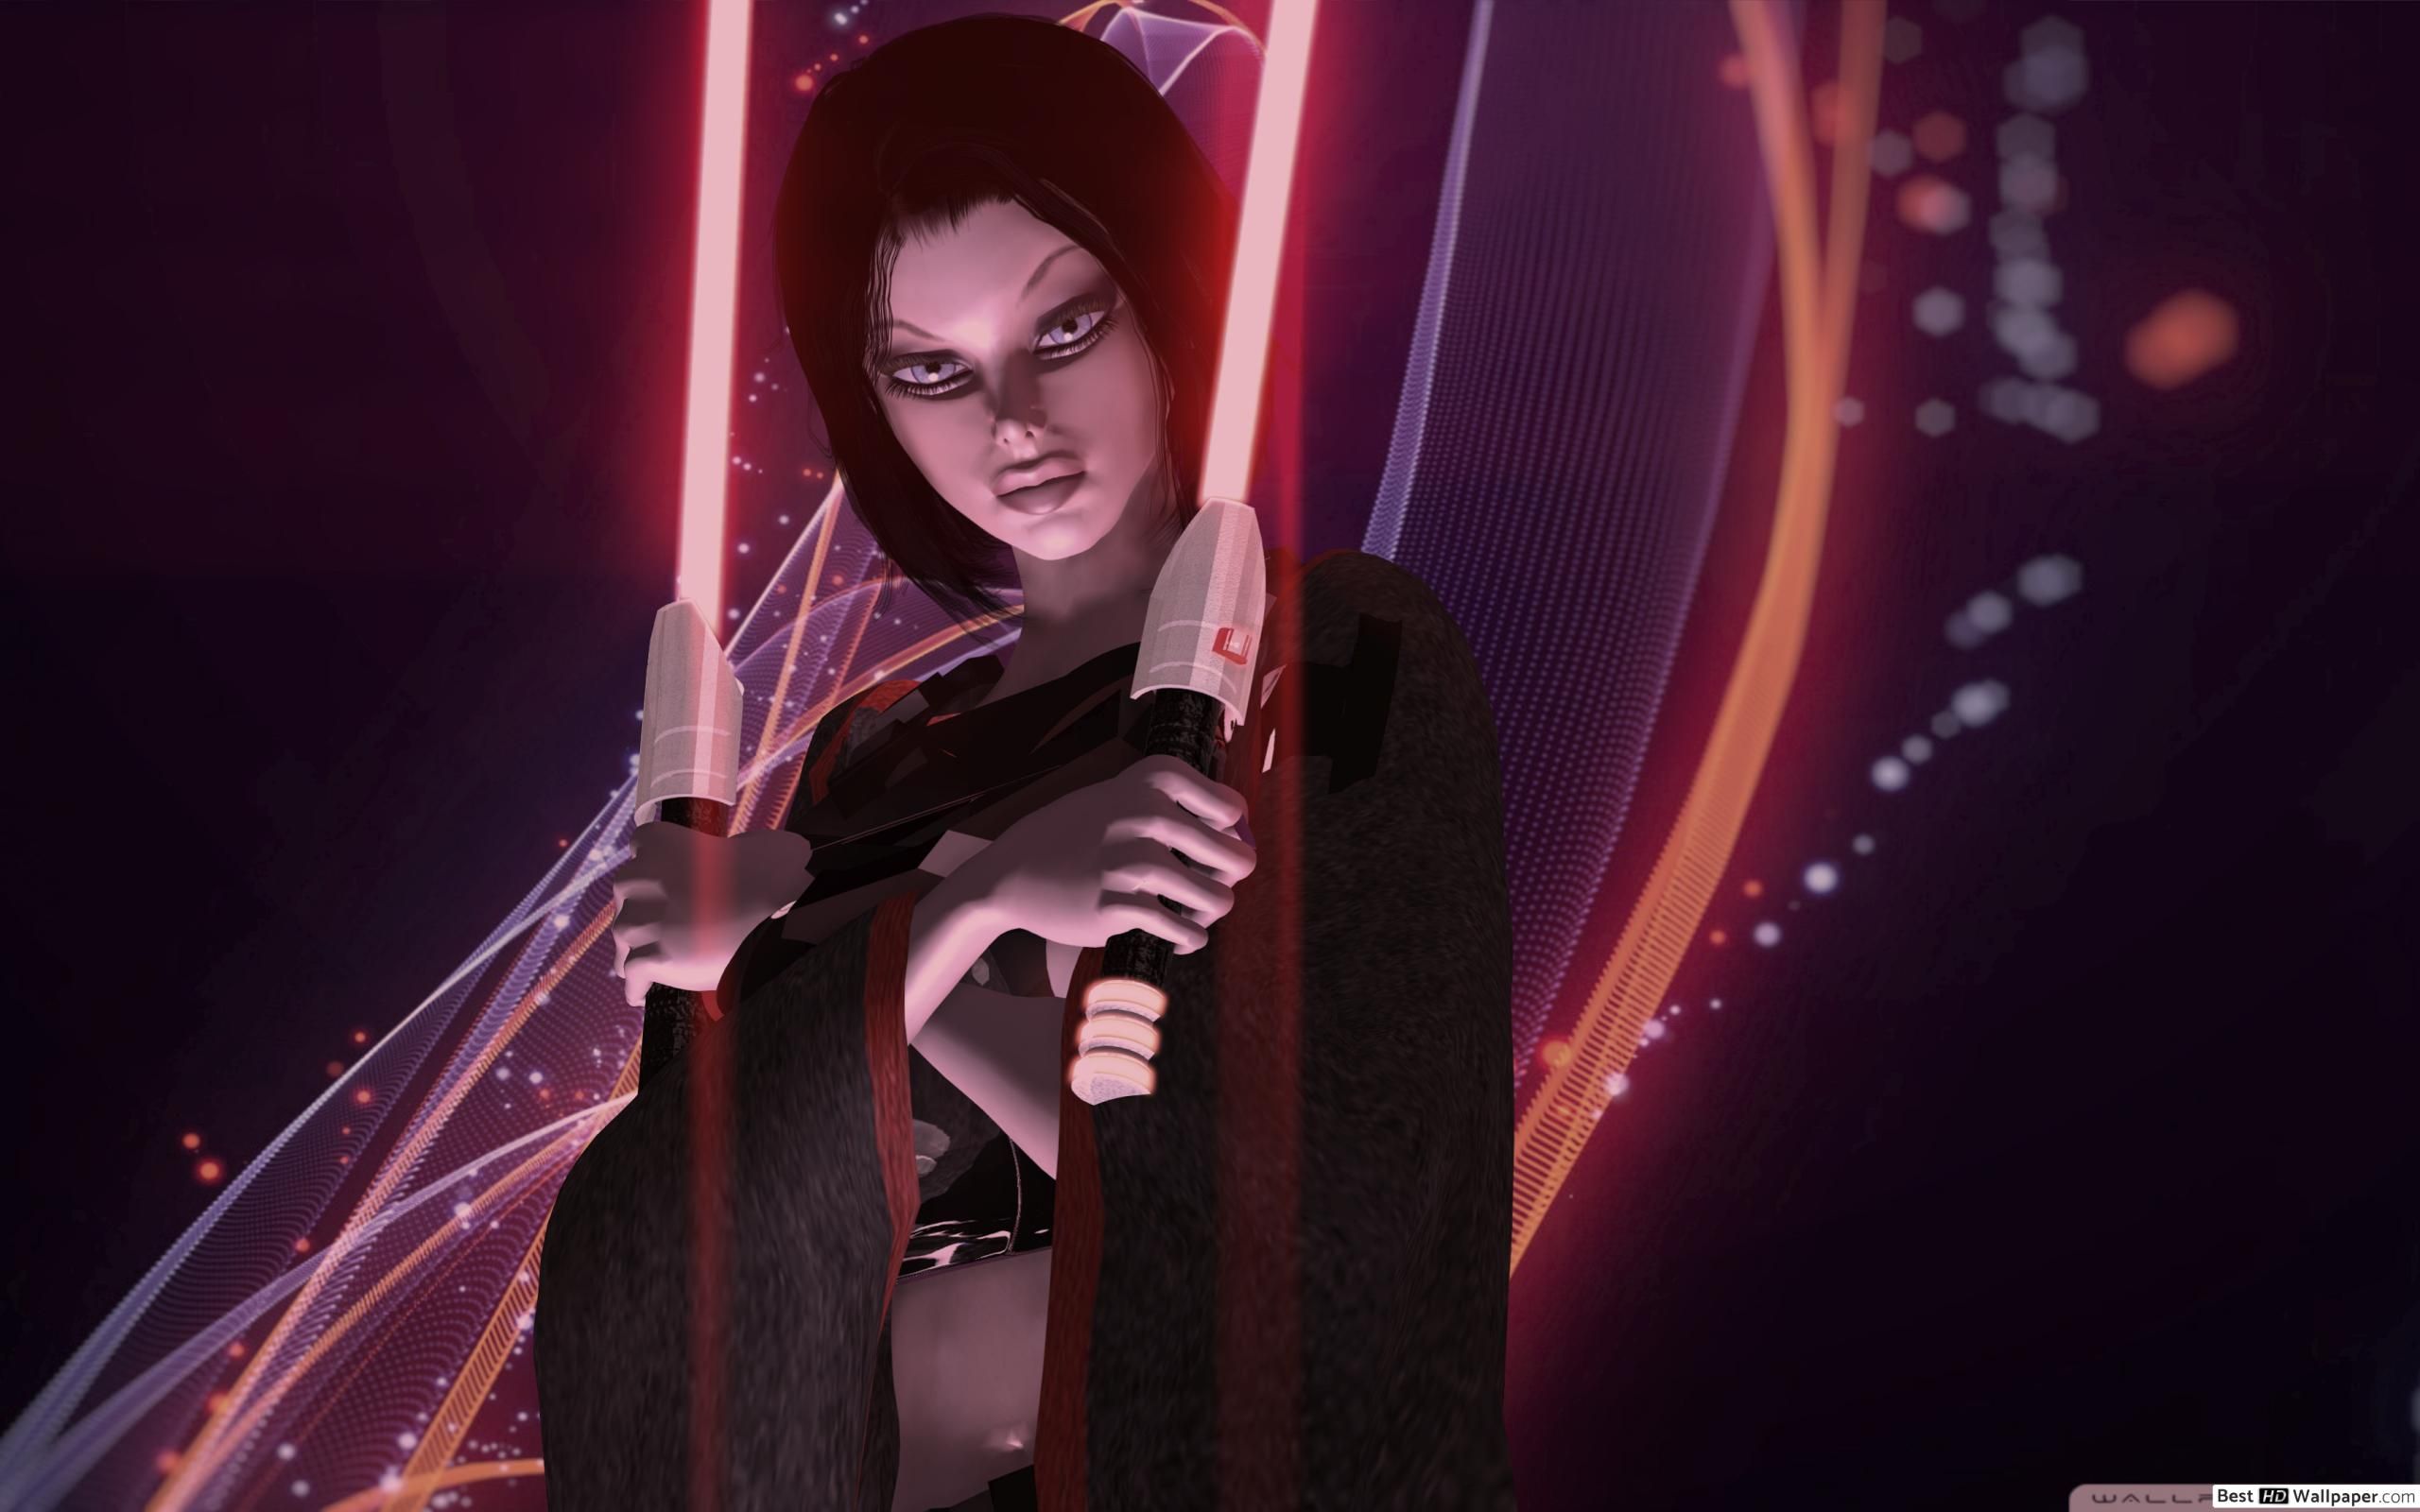 Sith Warrior Lady HD wallpaper download